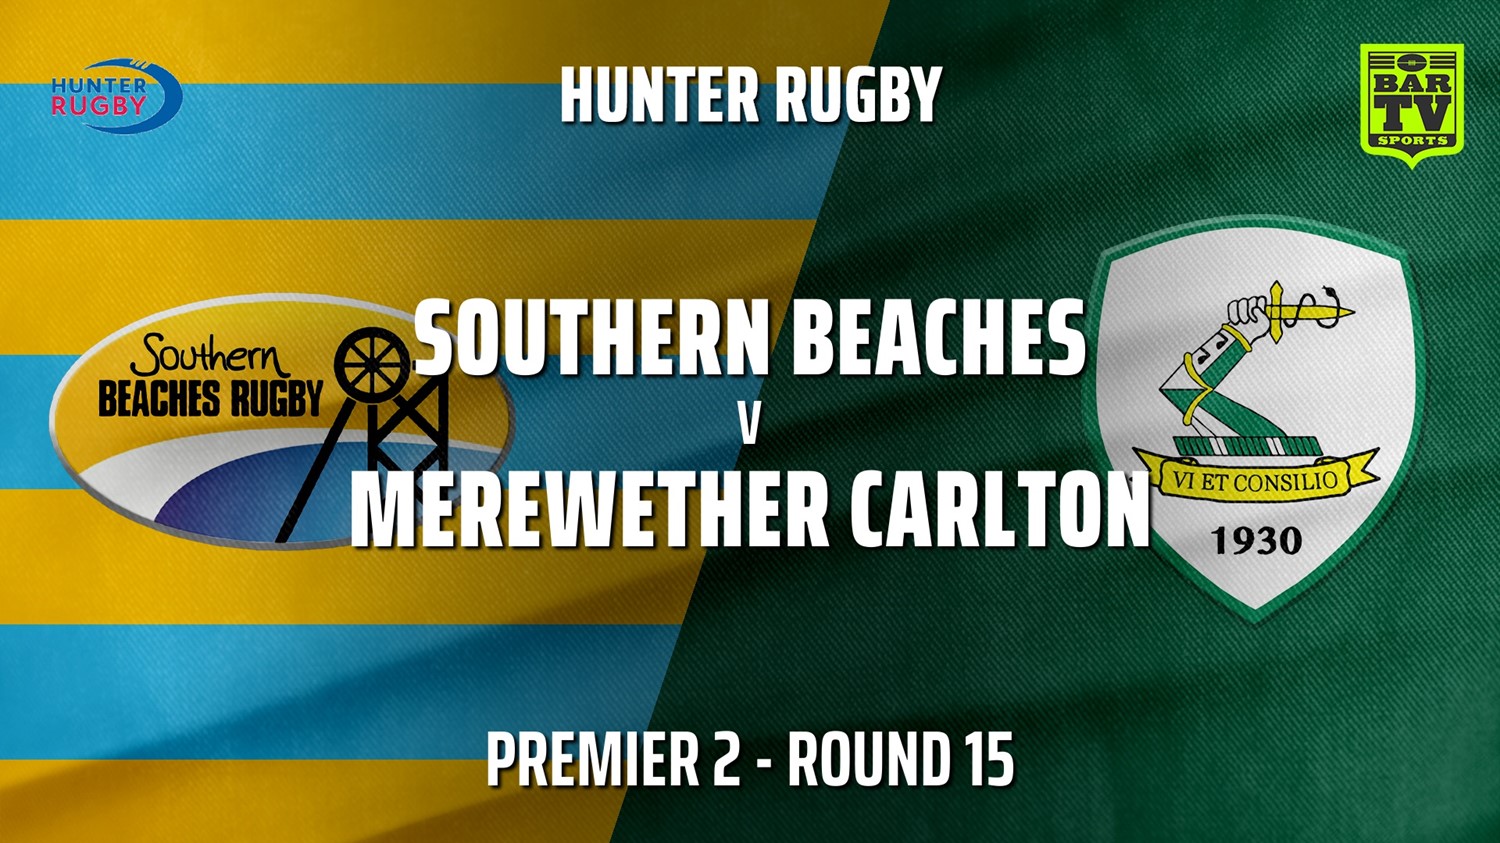 210731-Hunter Rugby Round 15 - Premier 2 - Southern Beaches v Merewether Carlton Slate Image